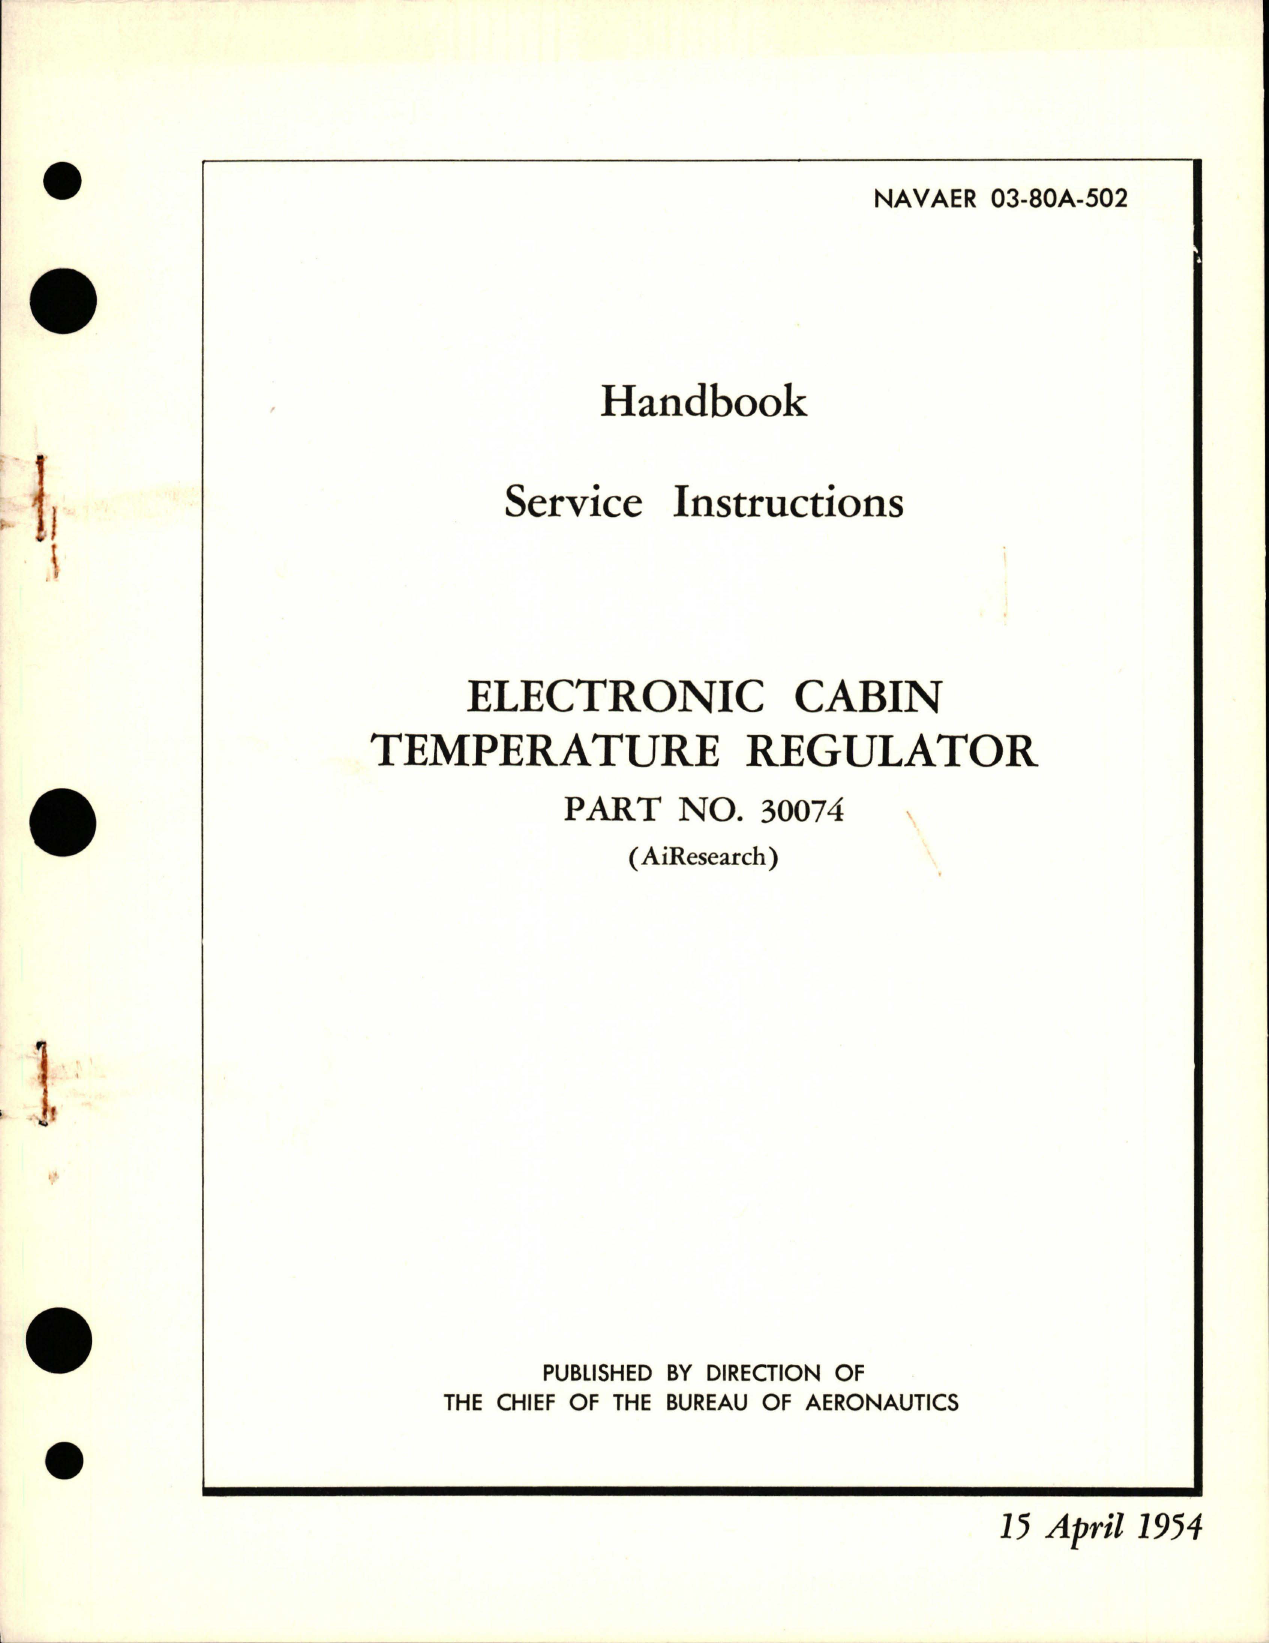 Sample page 1 from AirCorps Library document: Service Instructions for Electronic Cabin Temperature Regulator - Part 30074